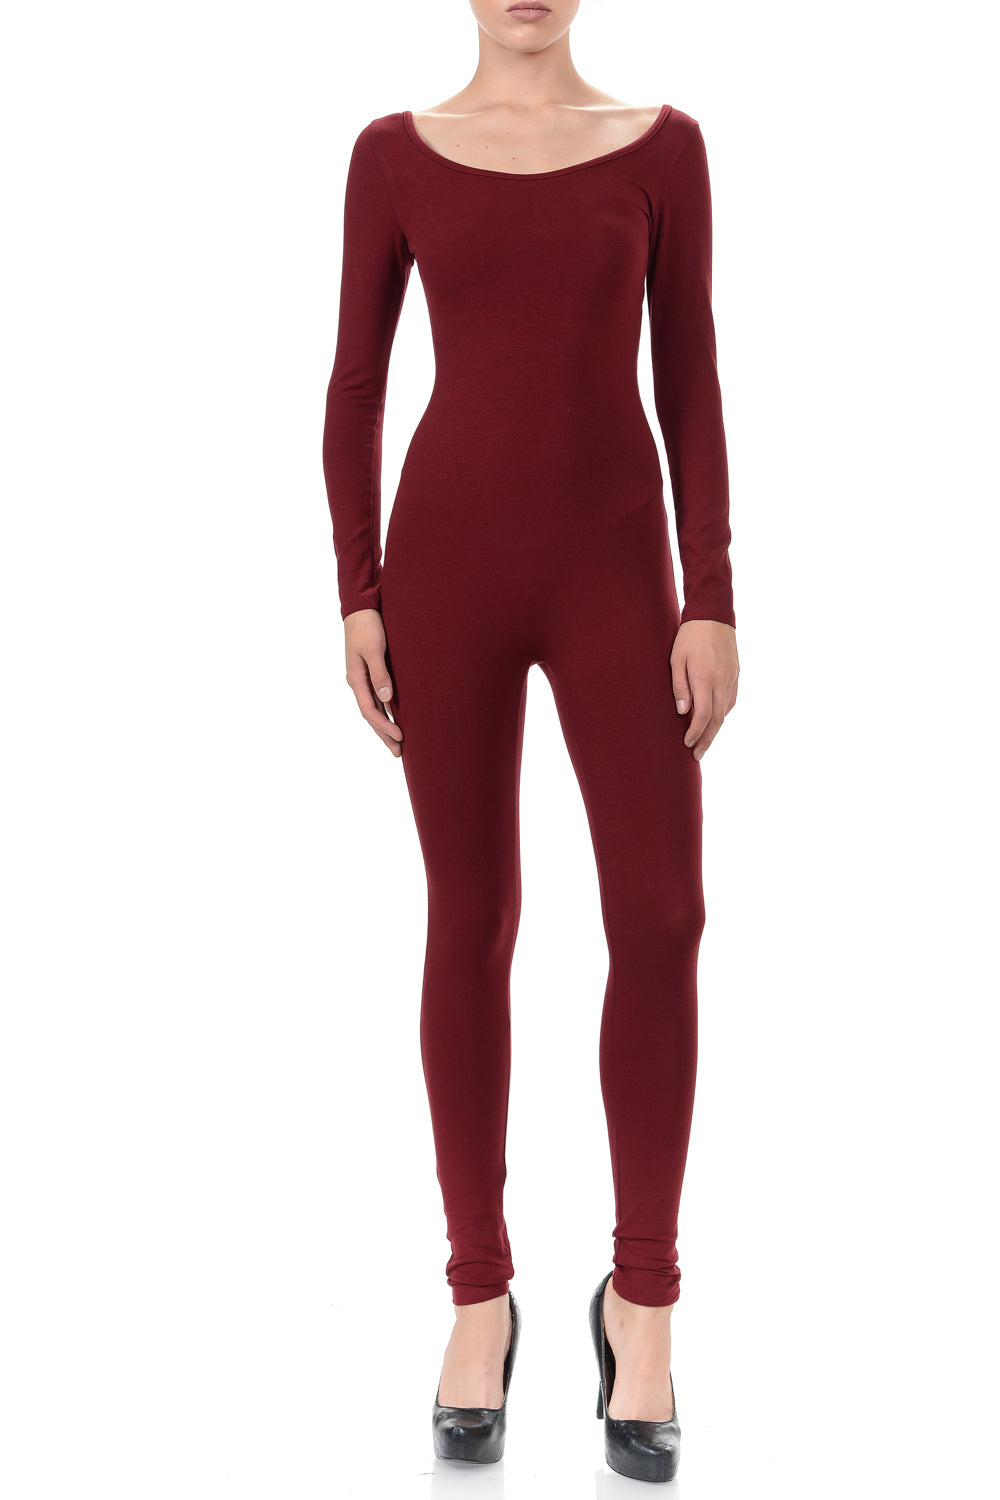 Dark Red Long Sleeve Zip up Yoga Jumpsuit Catsuit Gym Outfit